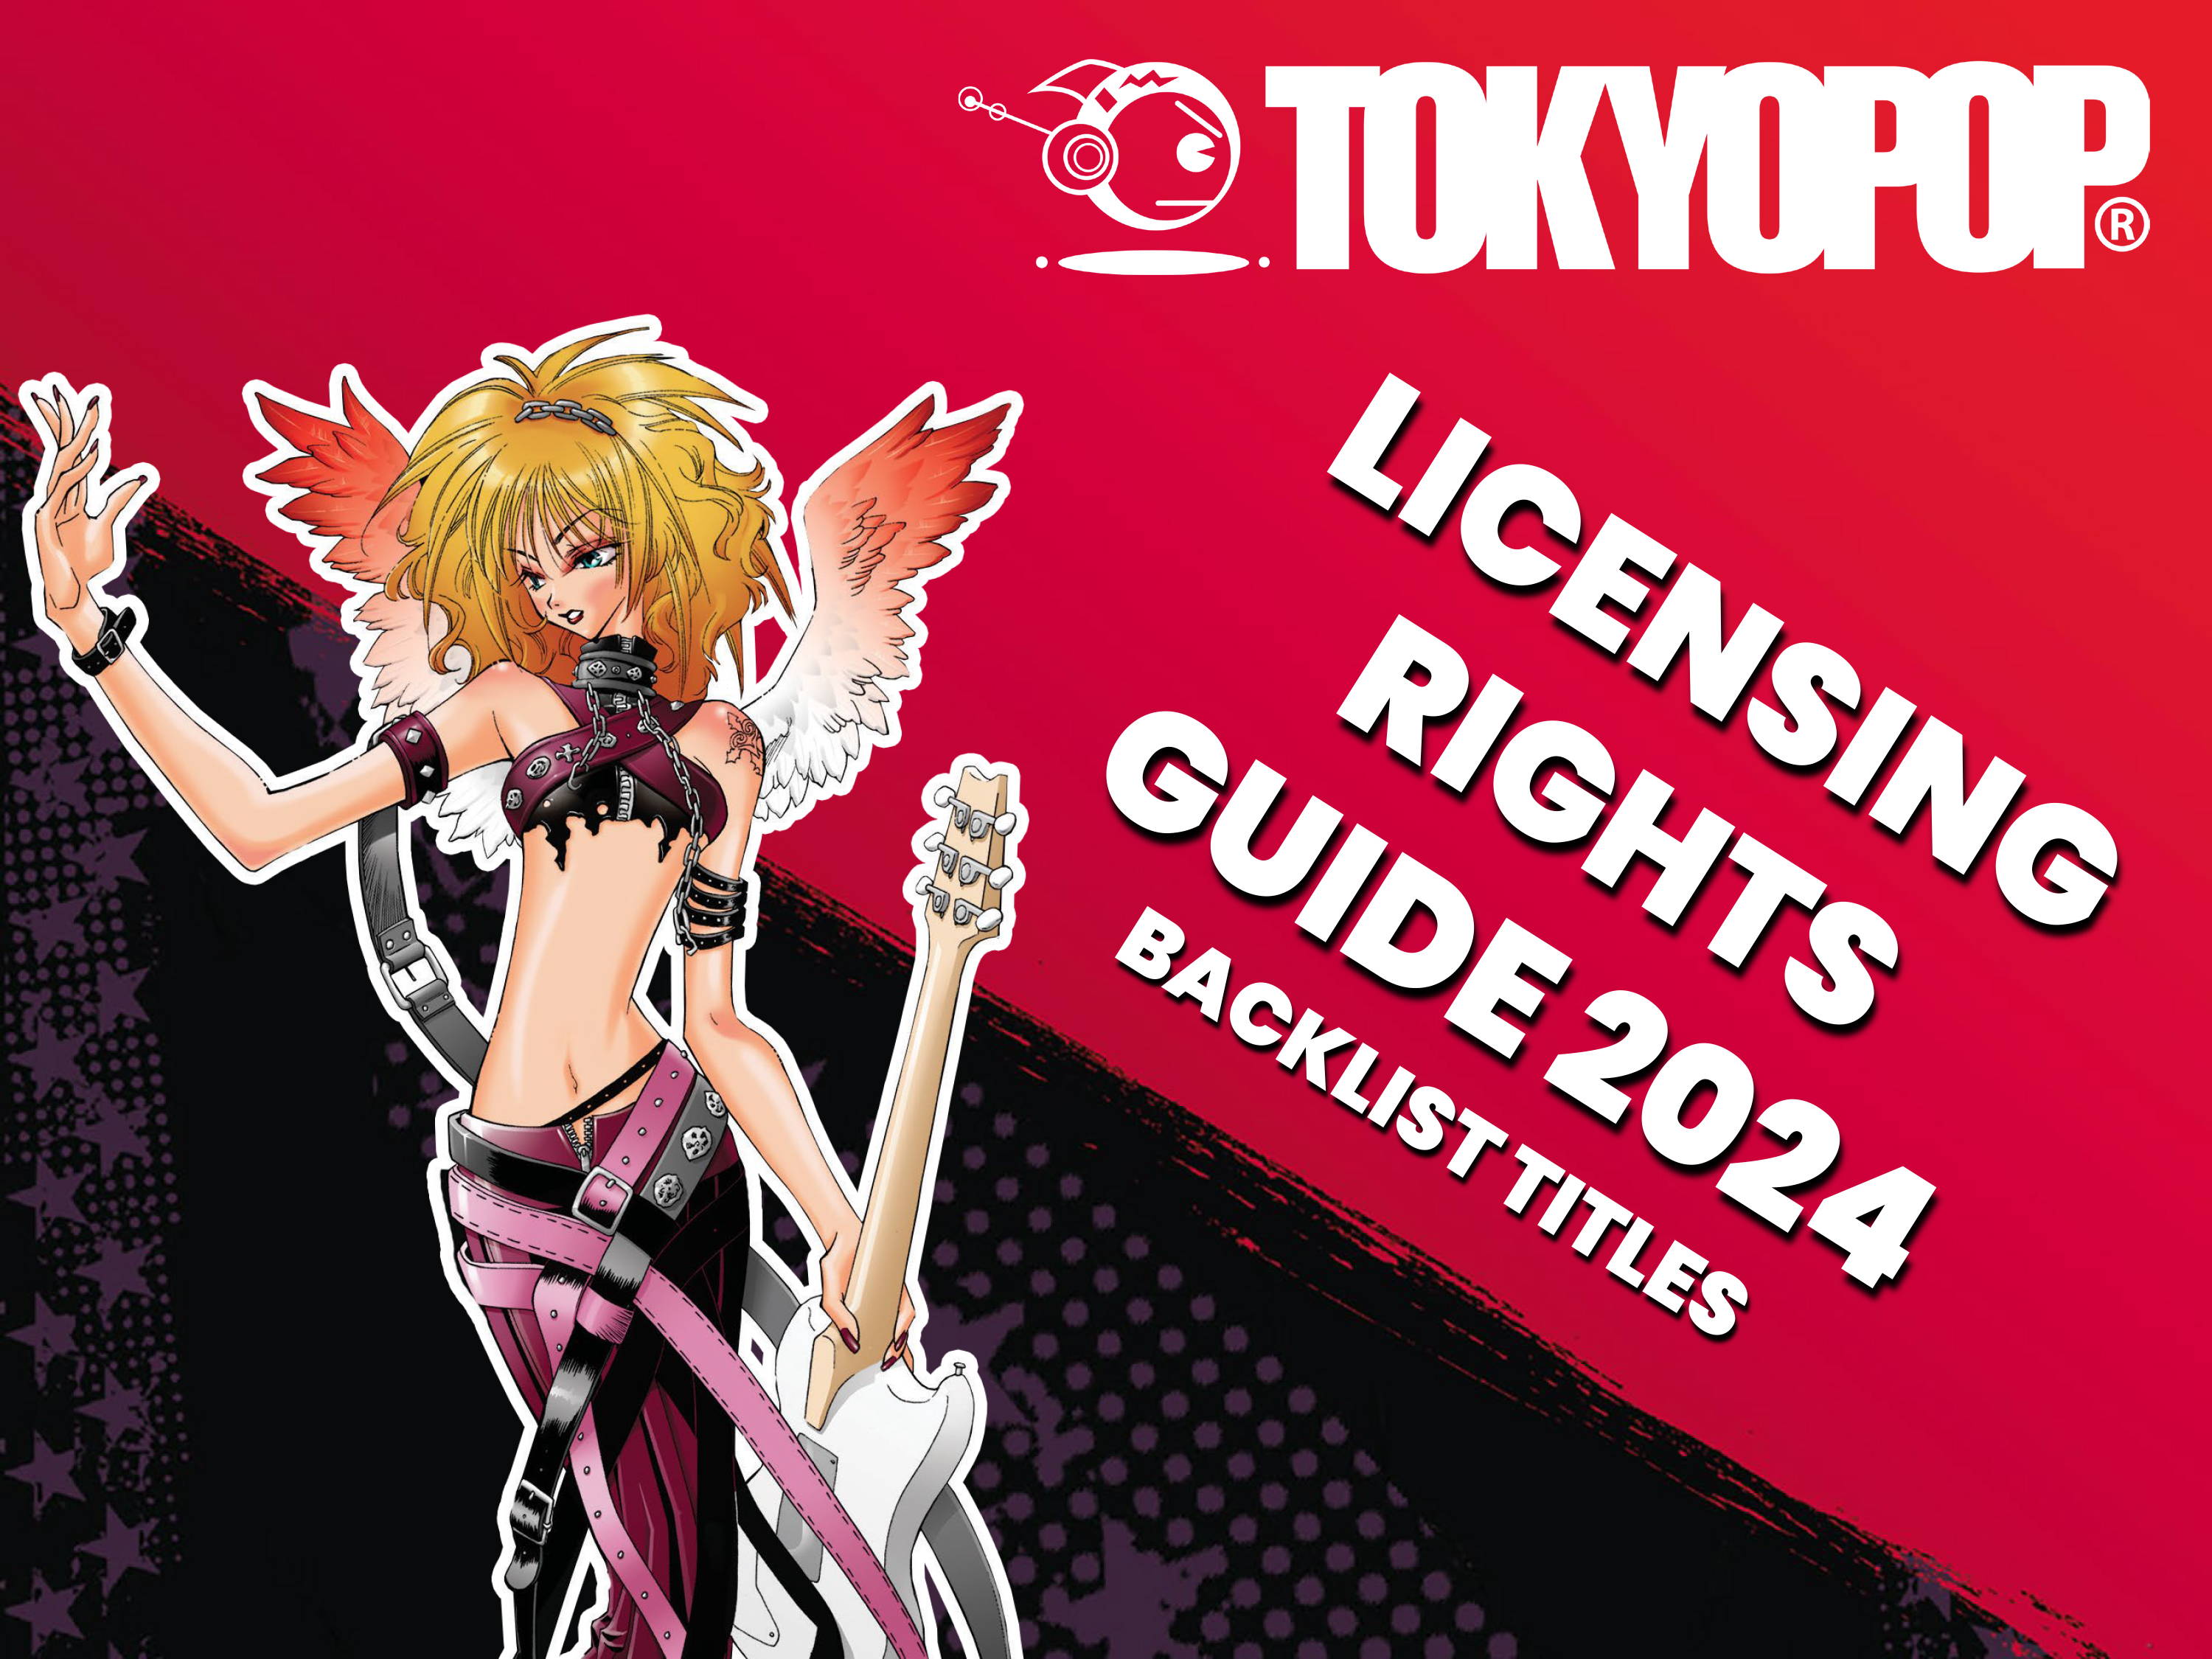 Licensing Rights Guide 2017 (Backlist Titles)